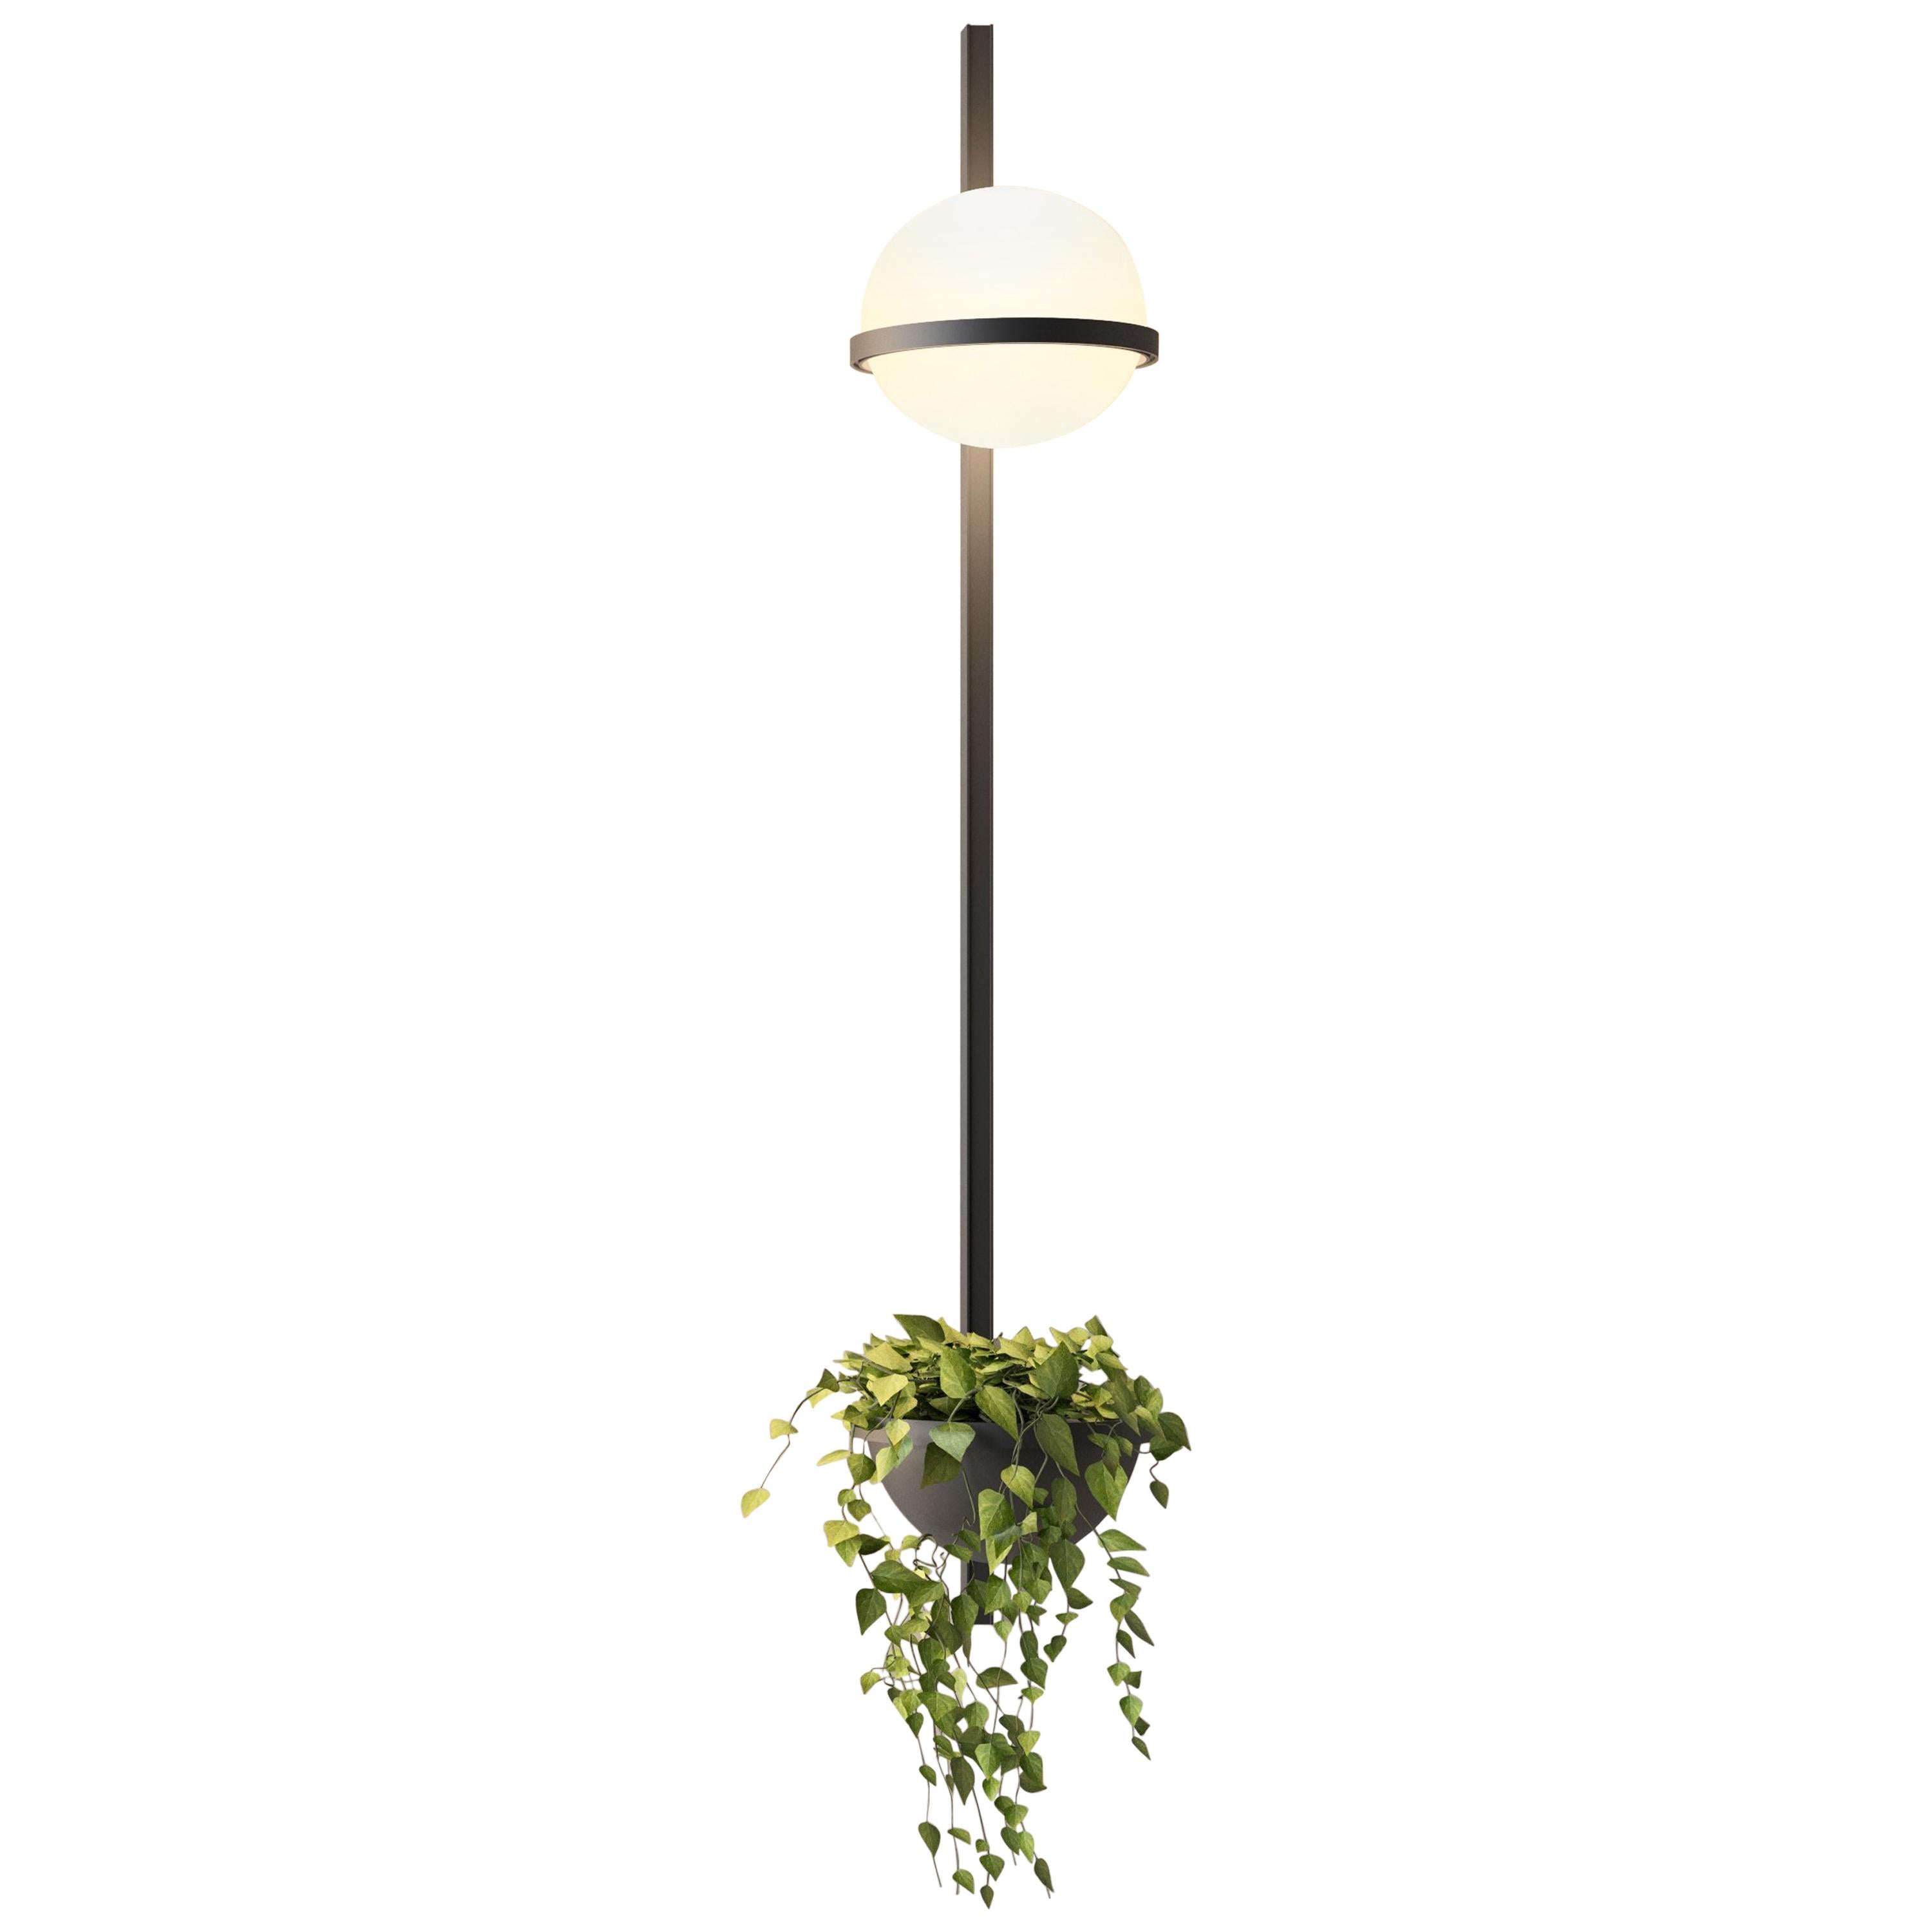 Palma LED Vertical Wall Lamp and Planter in Charcoal Grey by Antoni Arola For Sale